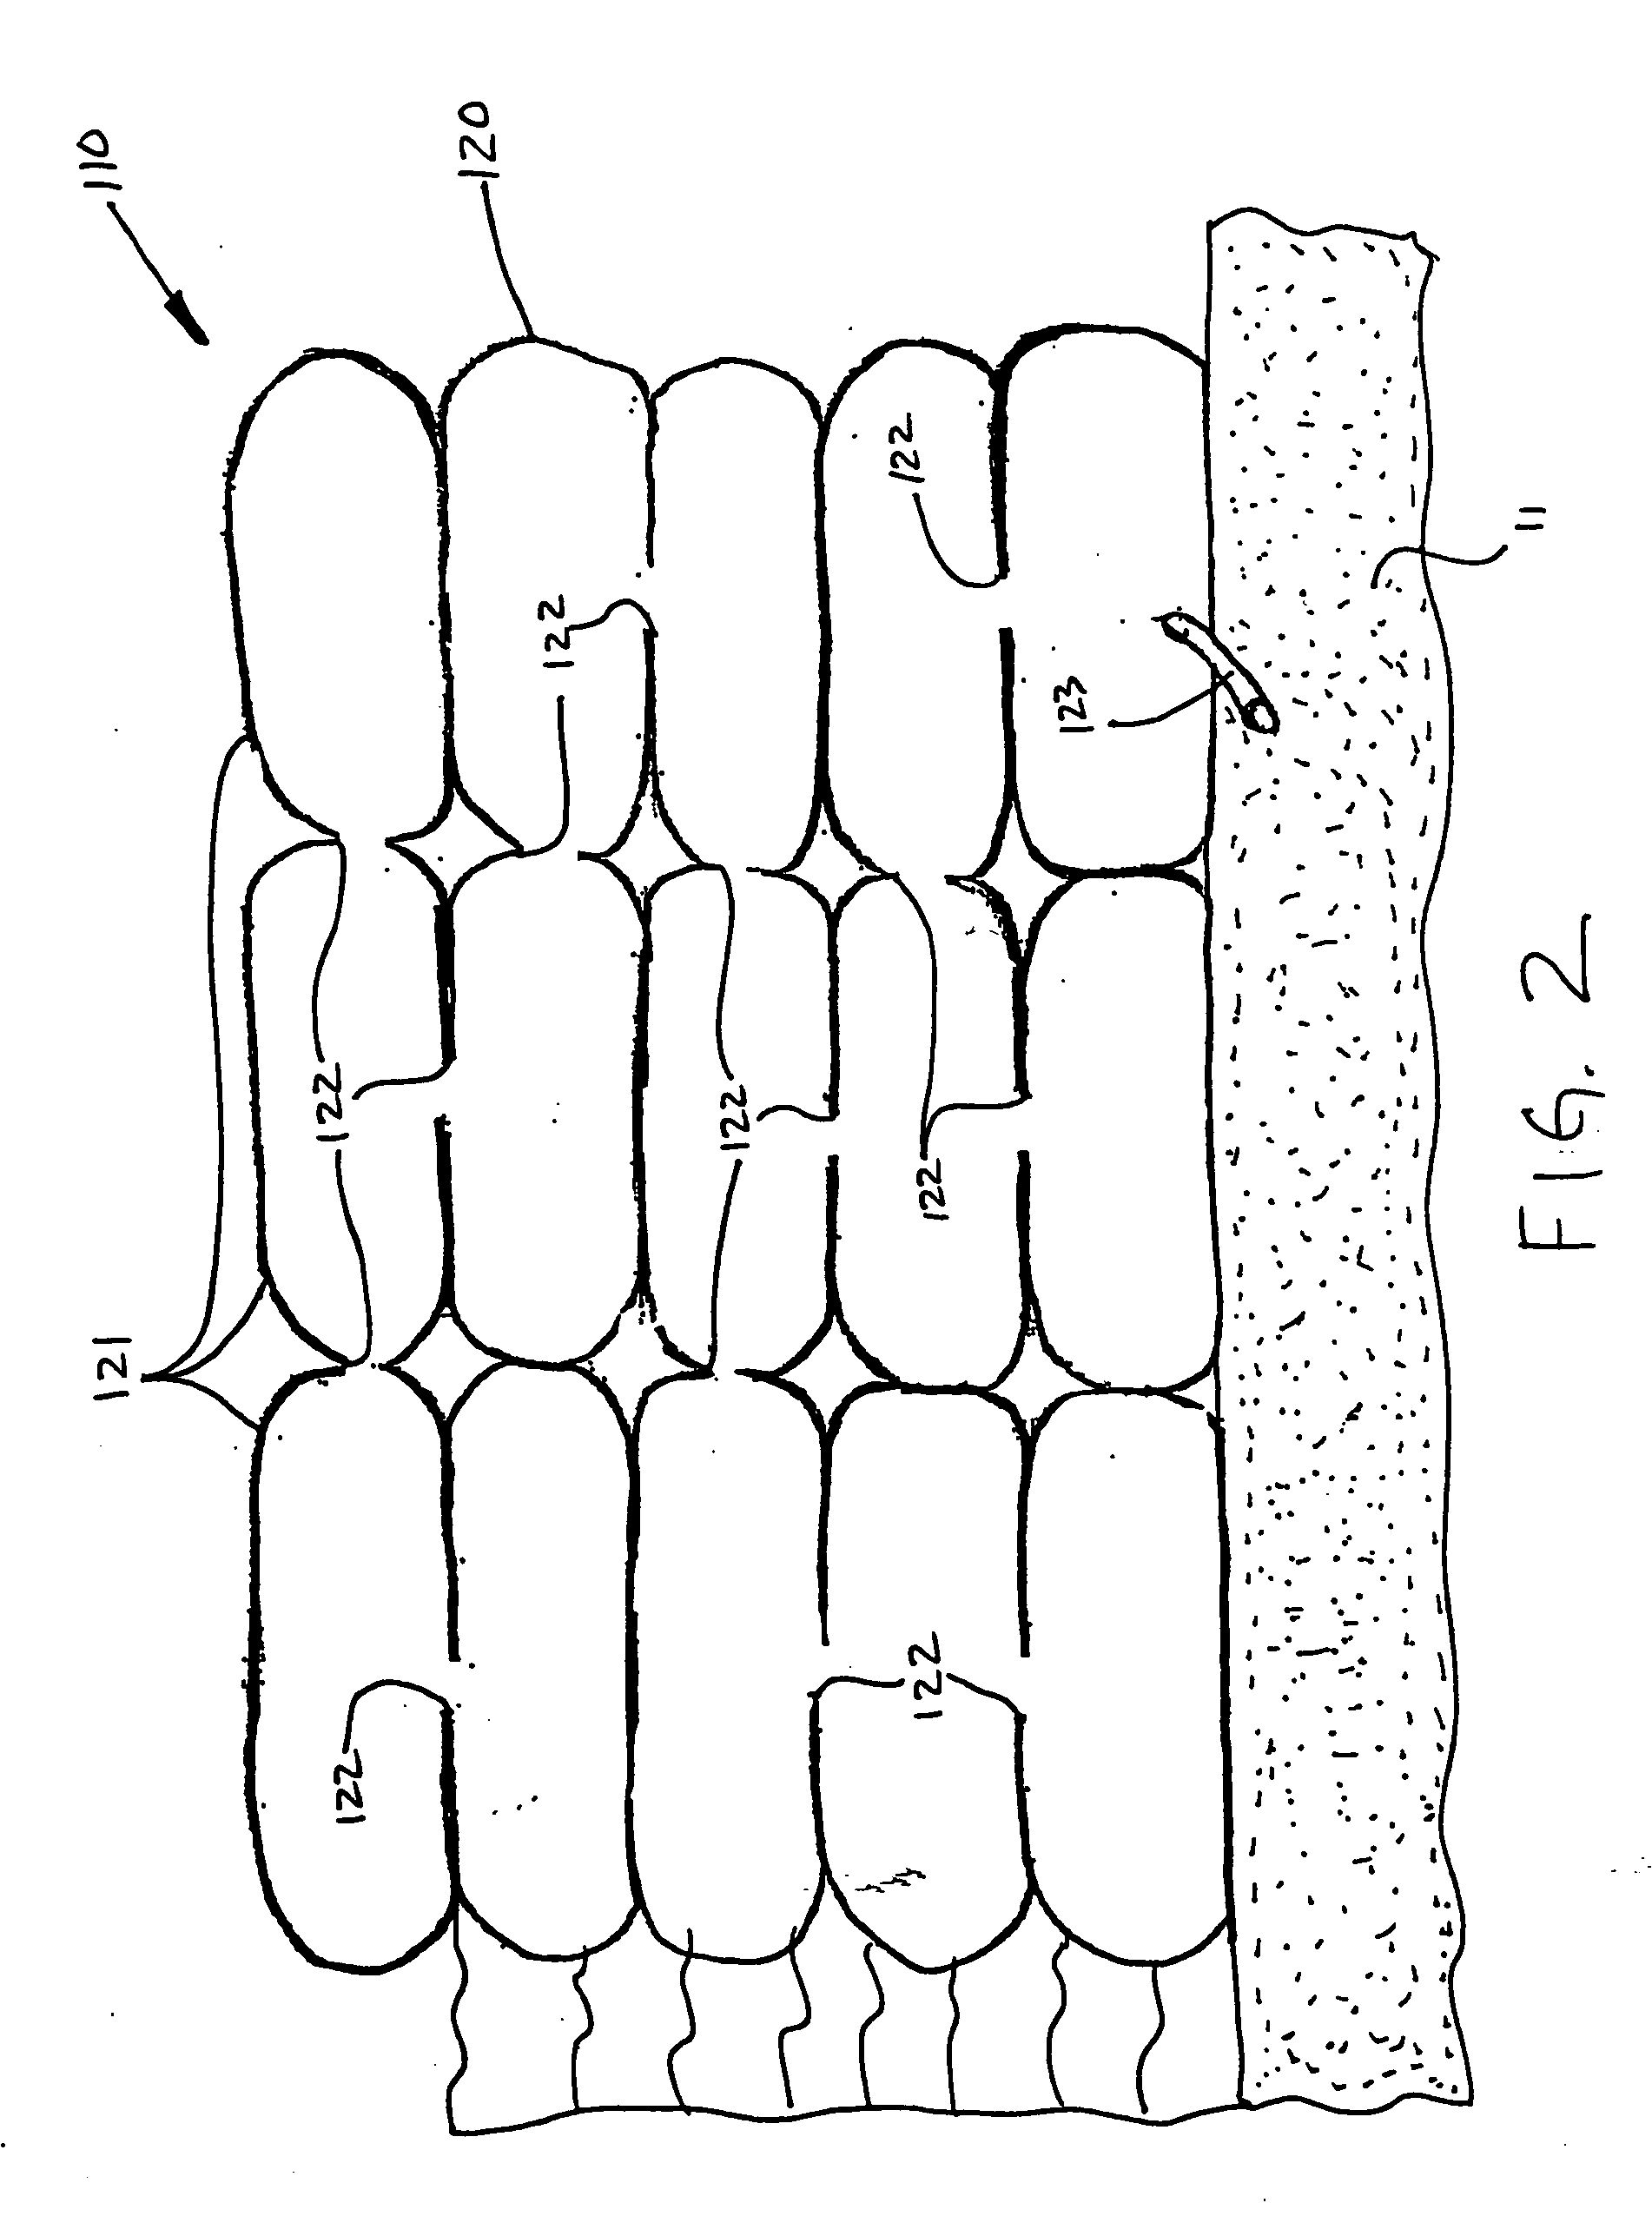 Fluid fillable multi-compartment bladder for flow and flood control